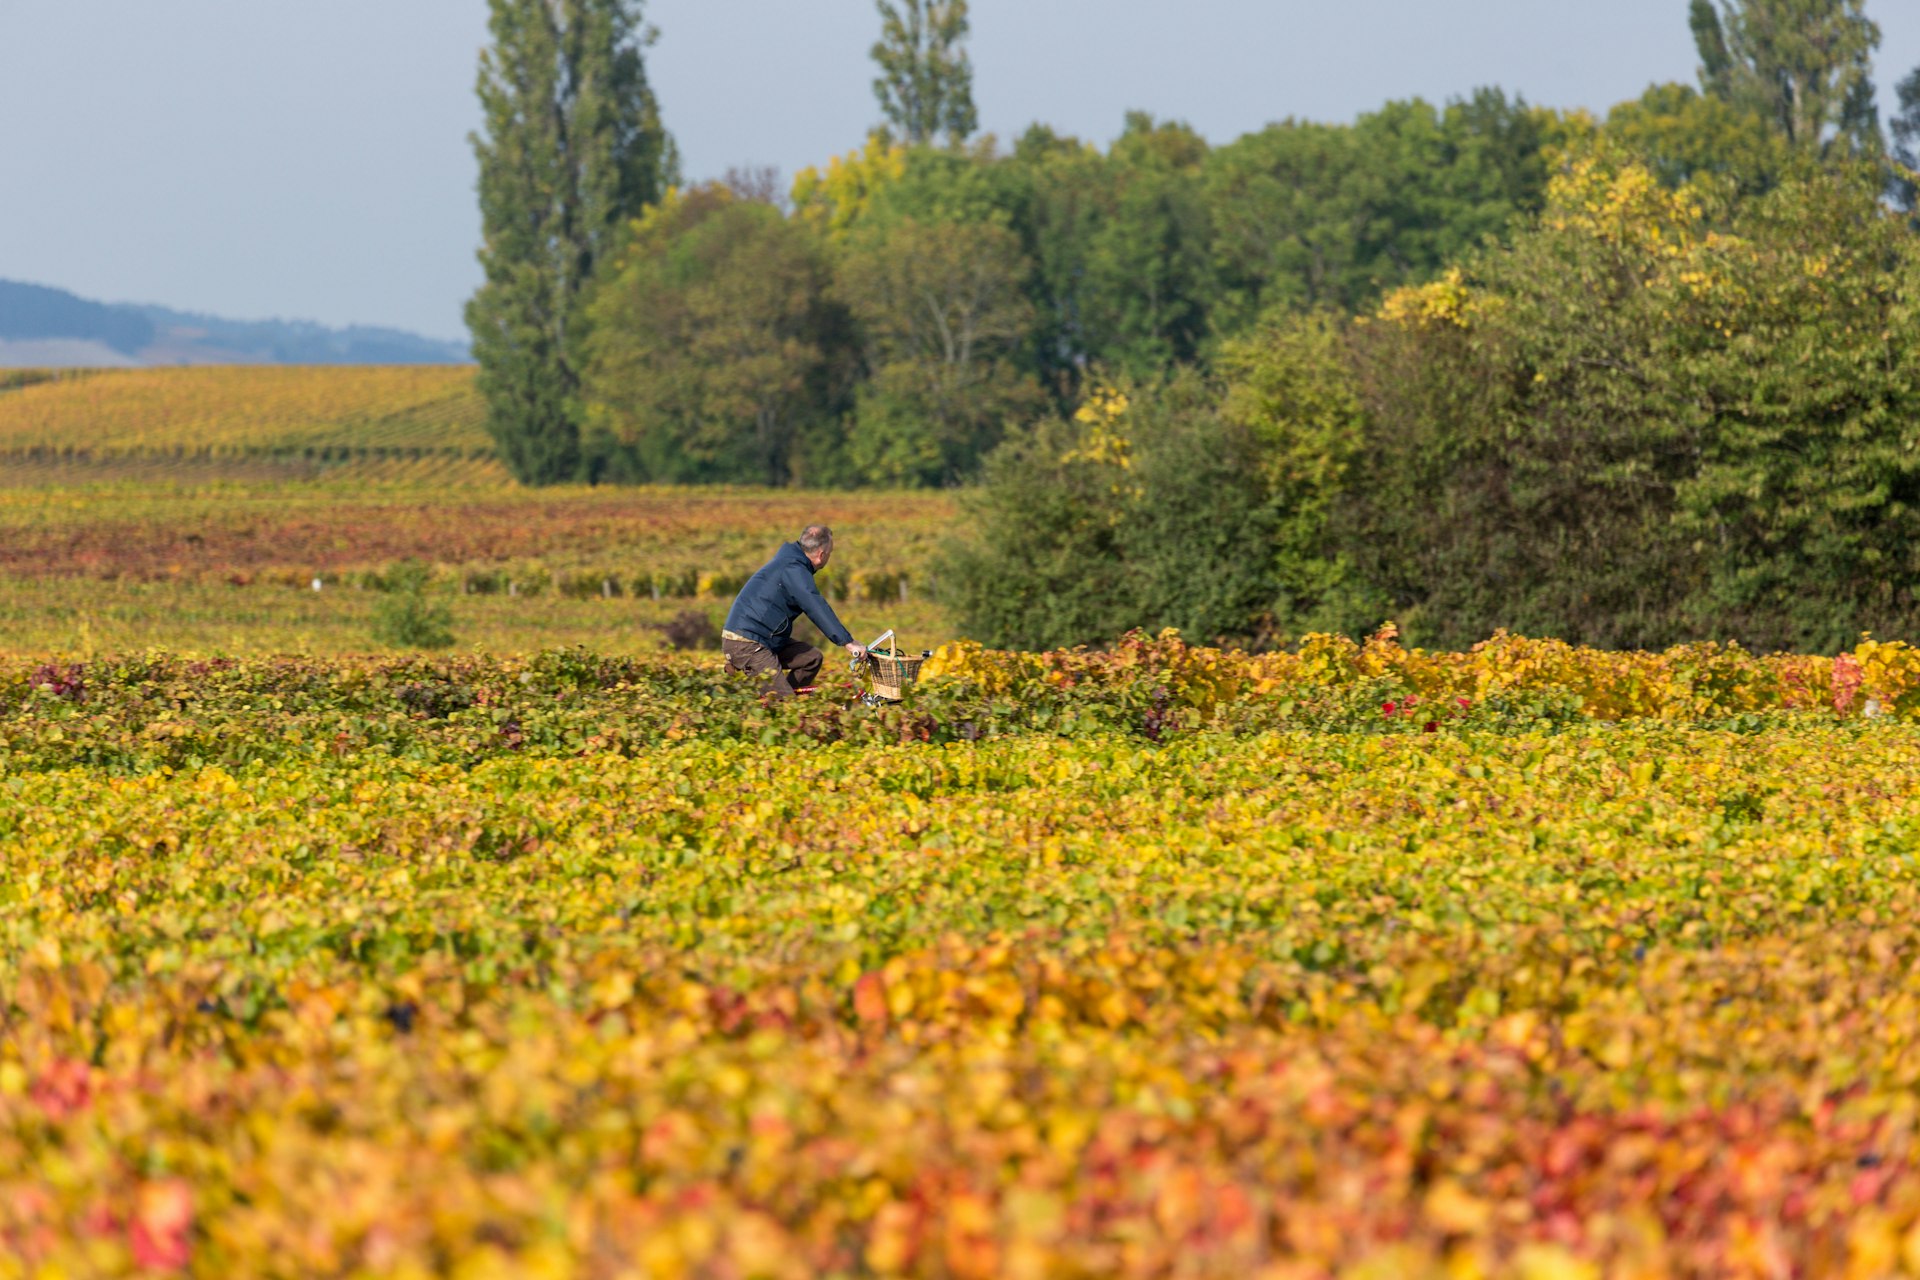 Man on bicycle surrounded by grapevines in autumn colors in Burgundy, France